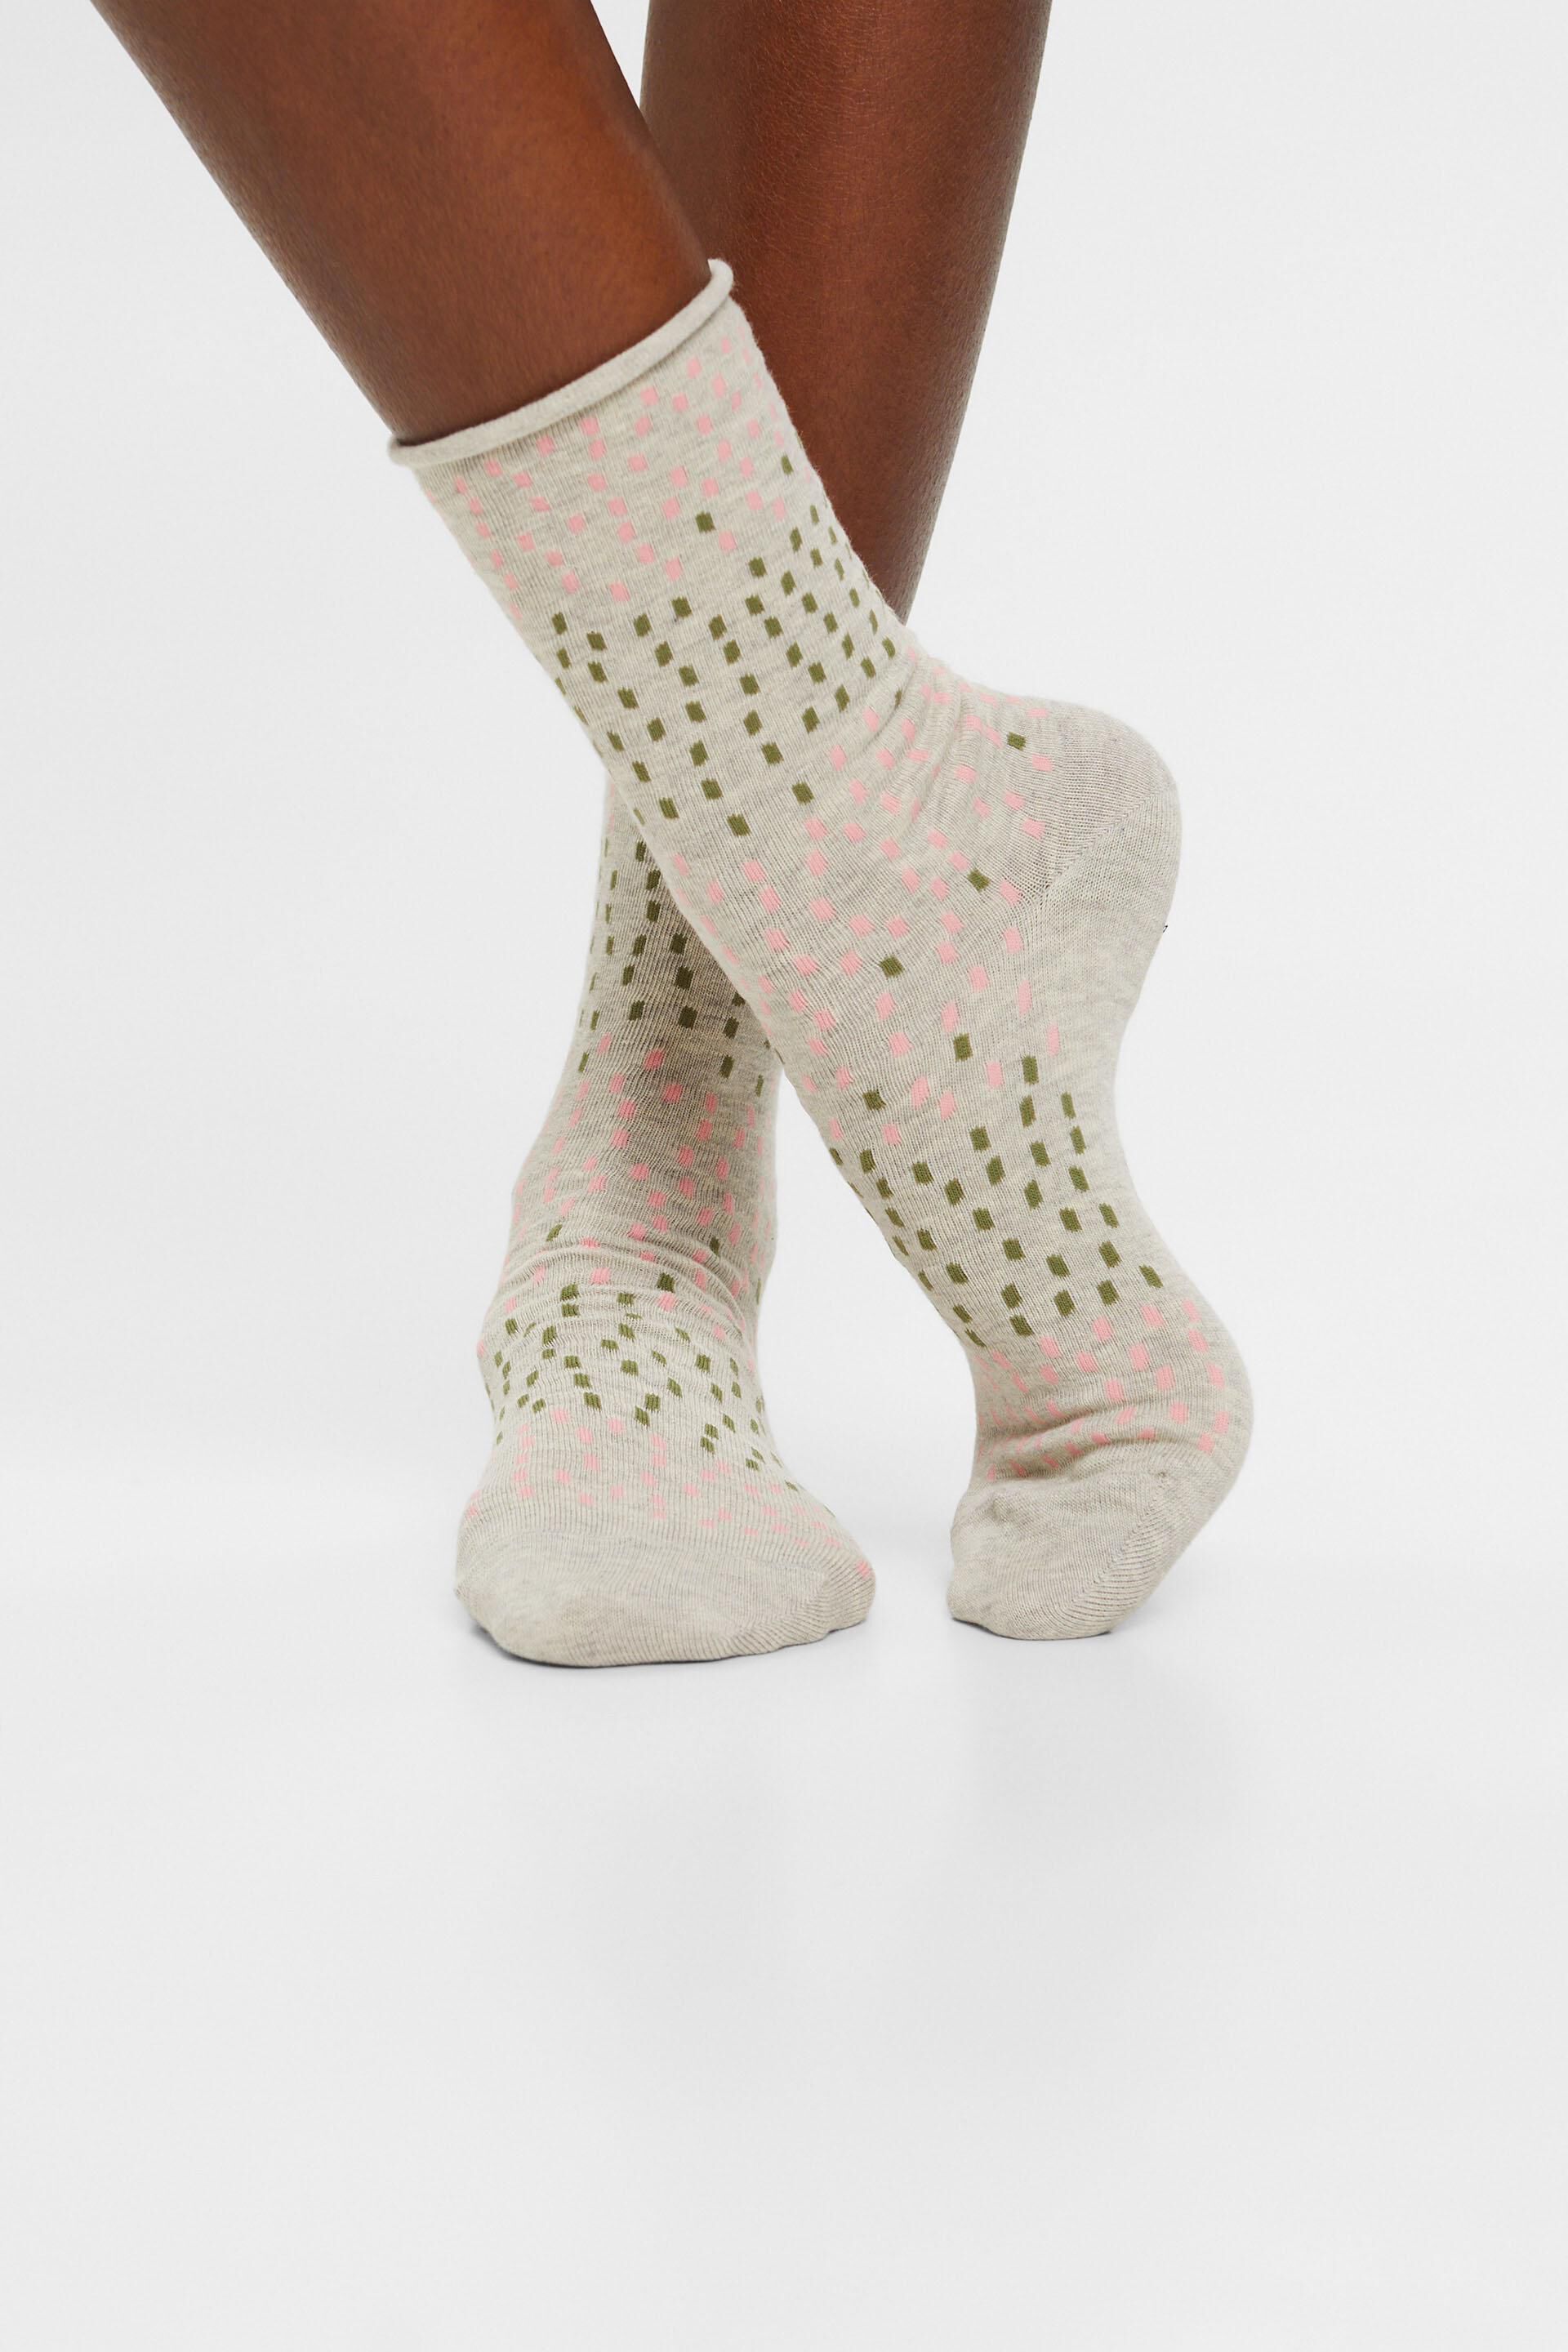 ESPRIT - 2-pack of dot pattern socks, organic cotton at our online shop